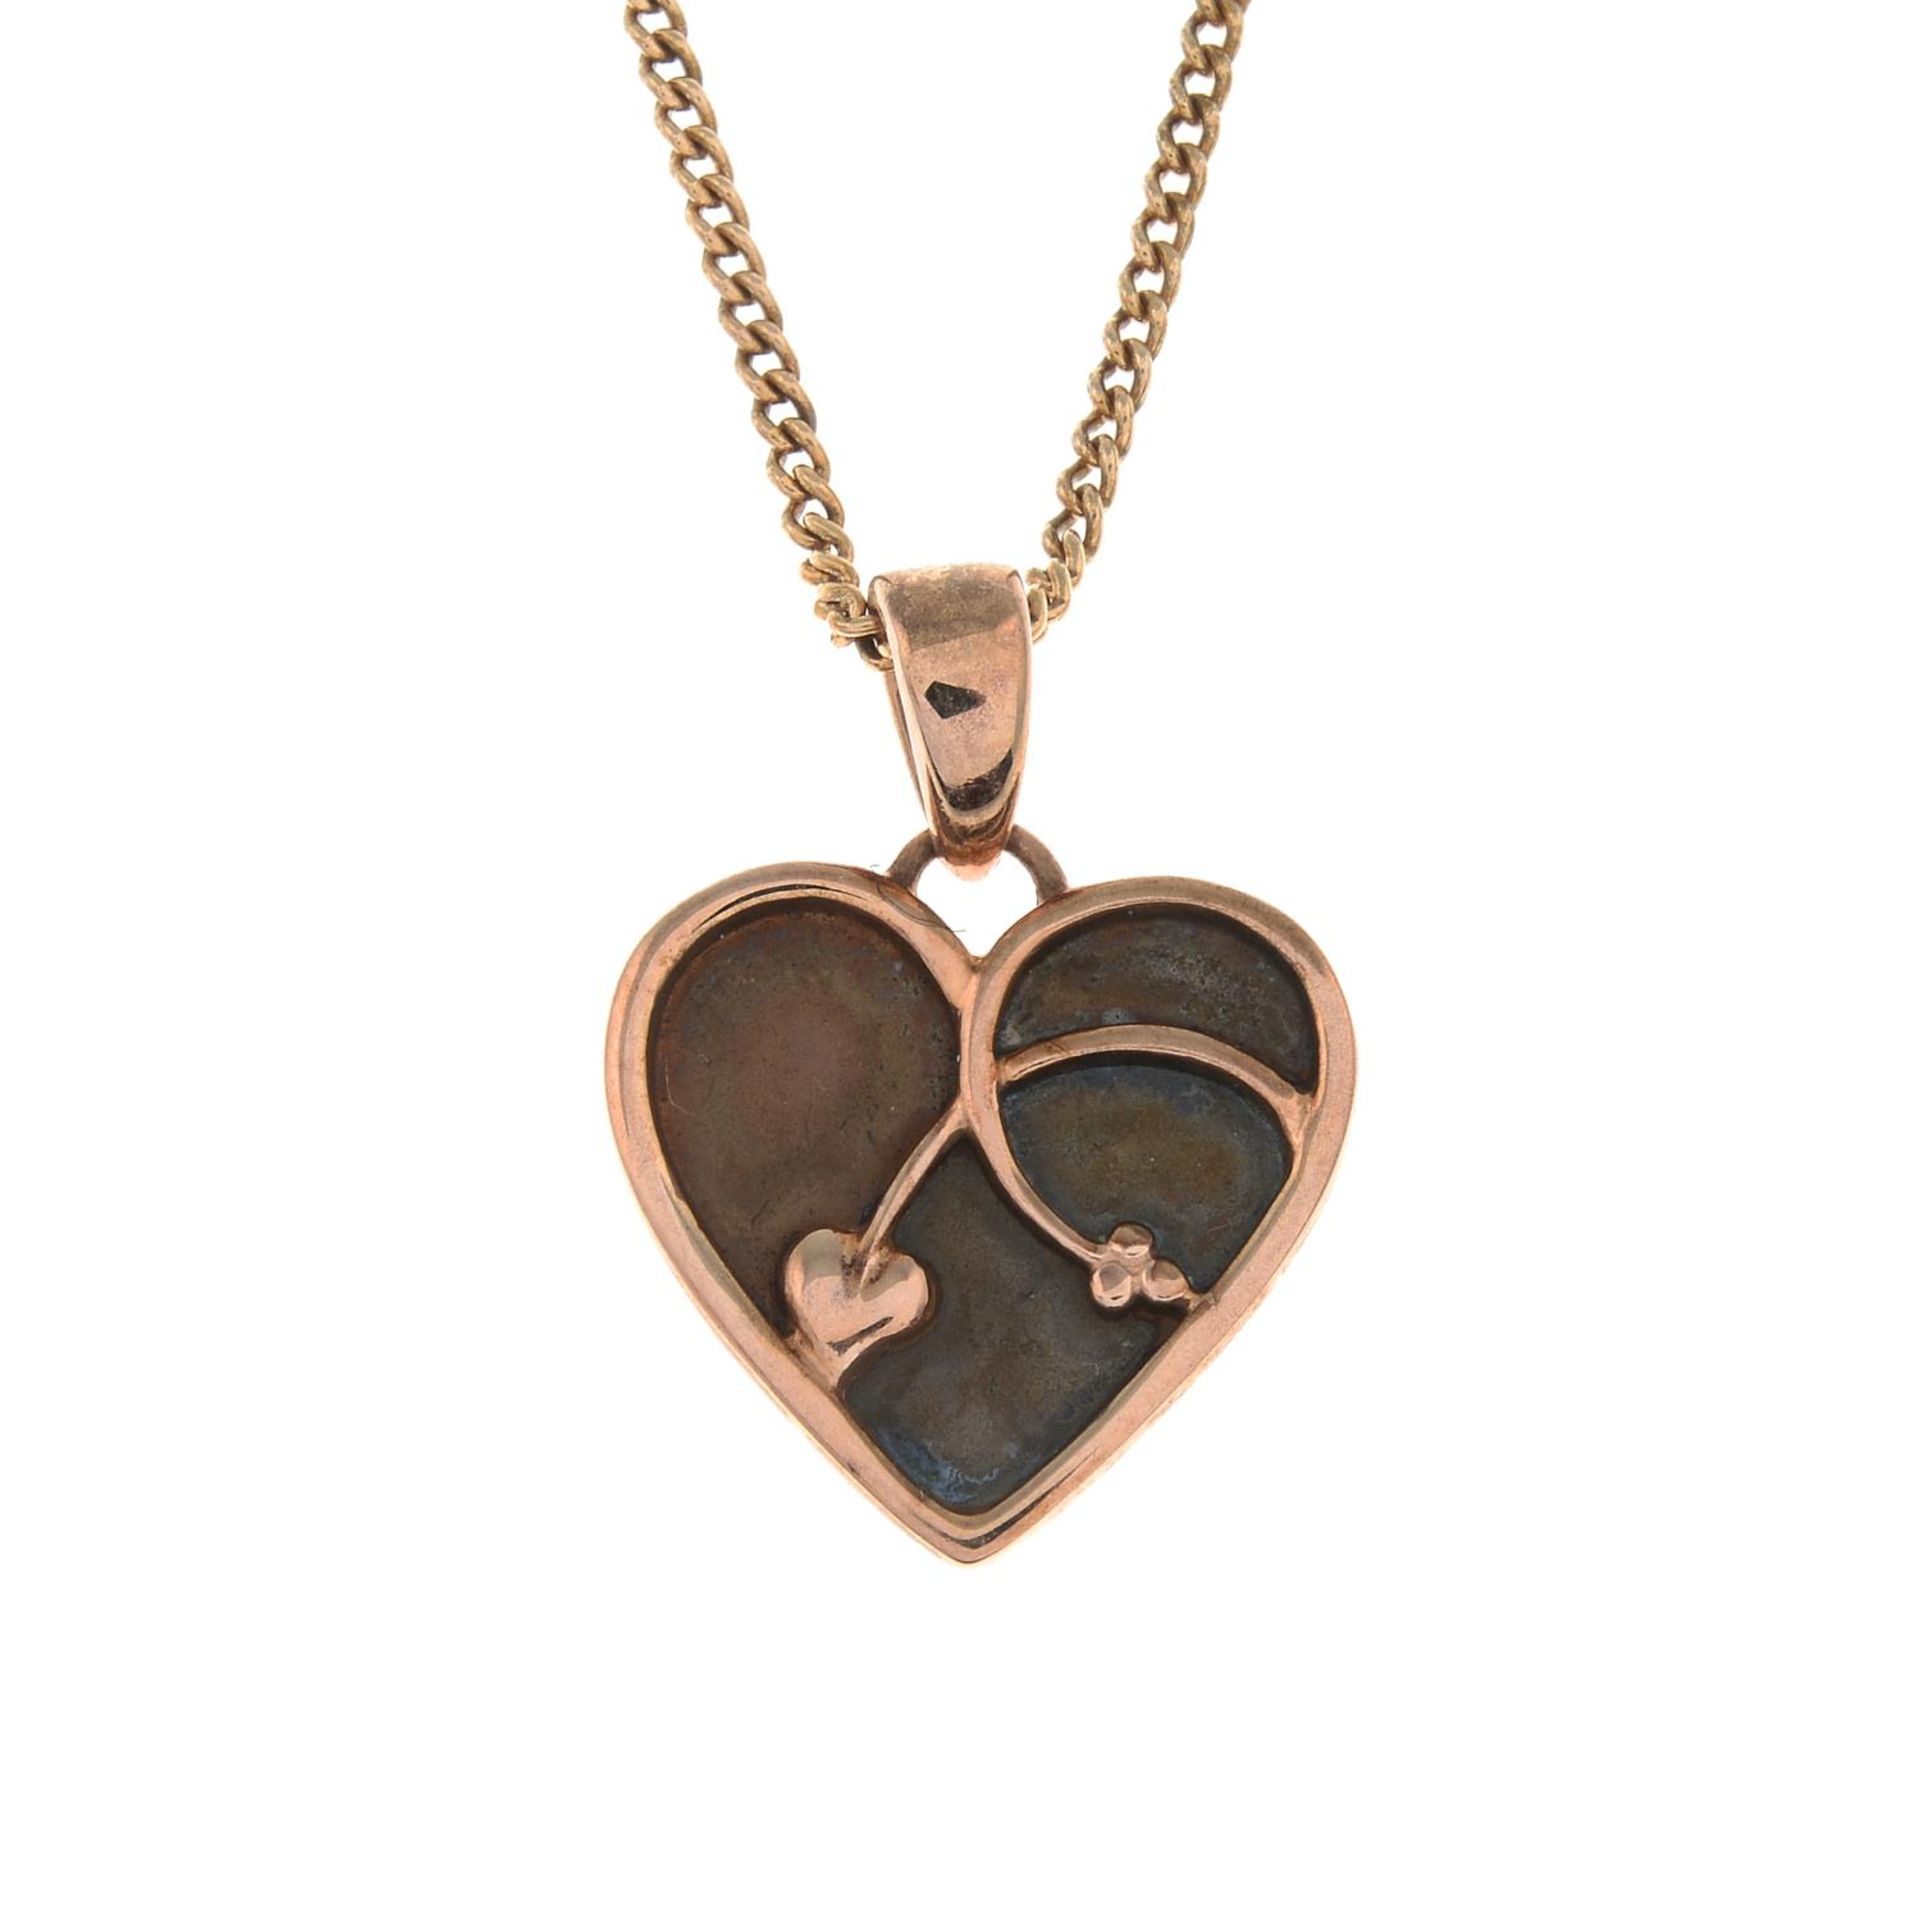 A 9ct gold 'Tree of Life' pendant, with chain, by Clogau.Maker's marks and signed for Clogau.